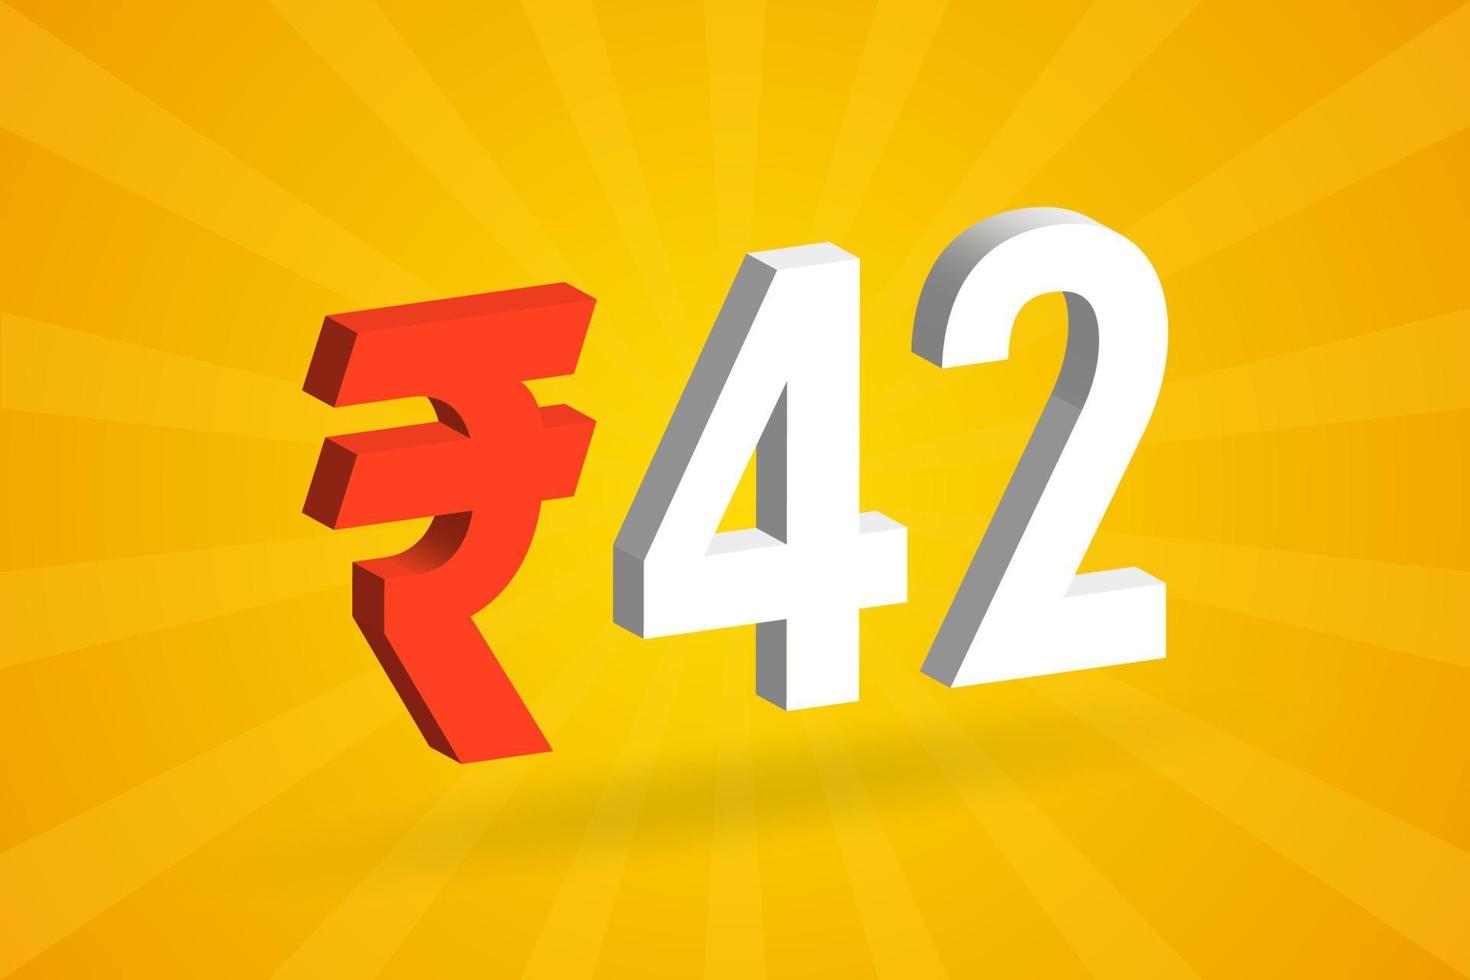 42 Rupee 3D symbol bold text vector image. 3D 42 Indian Rupee currency sign vector illustration